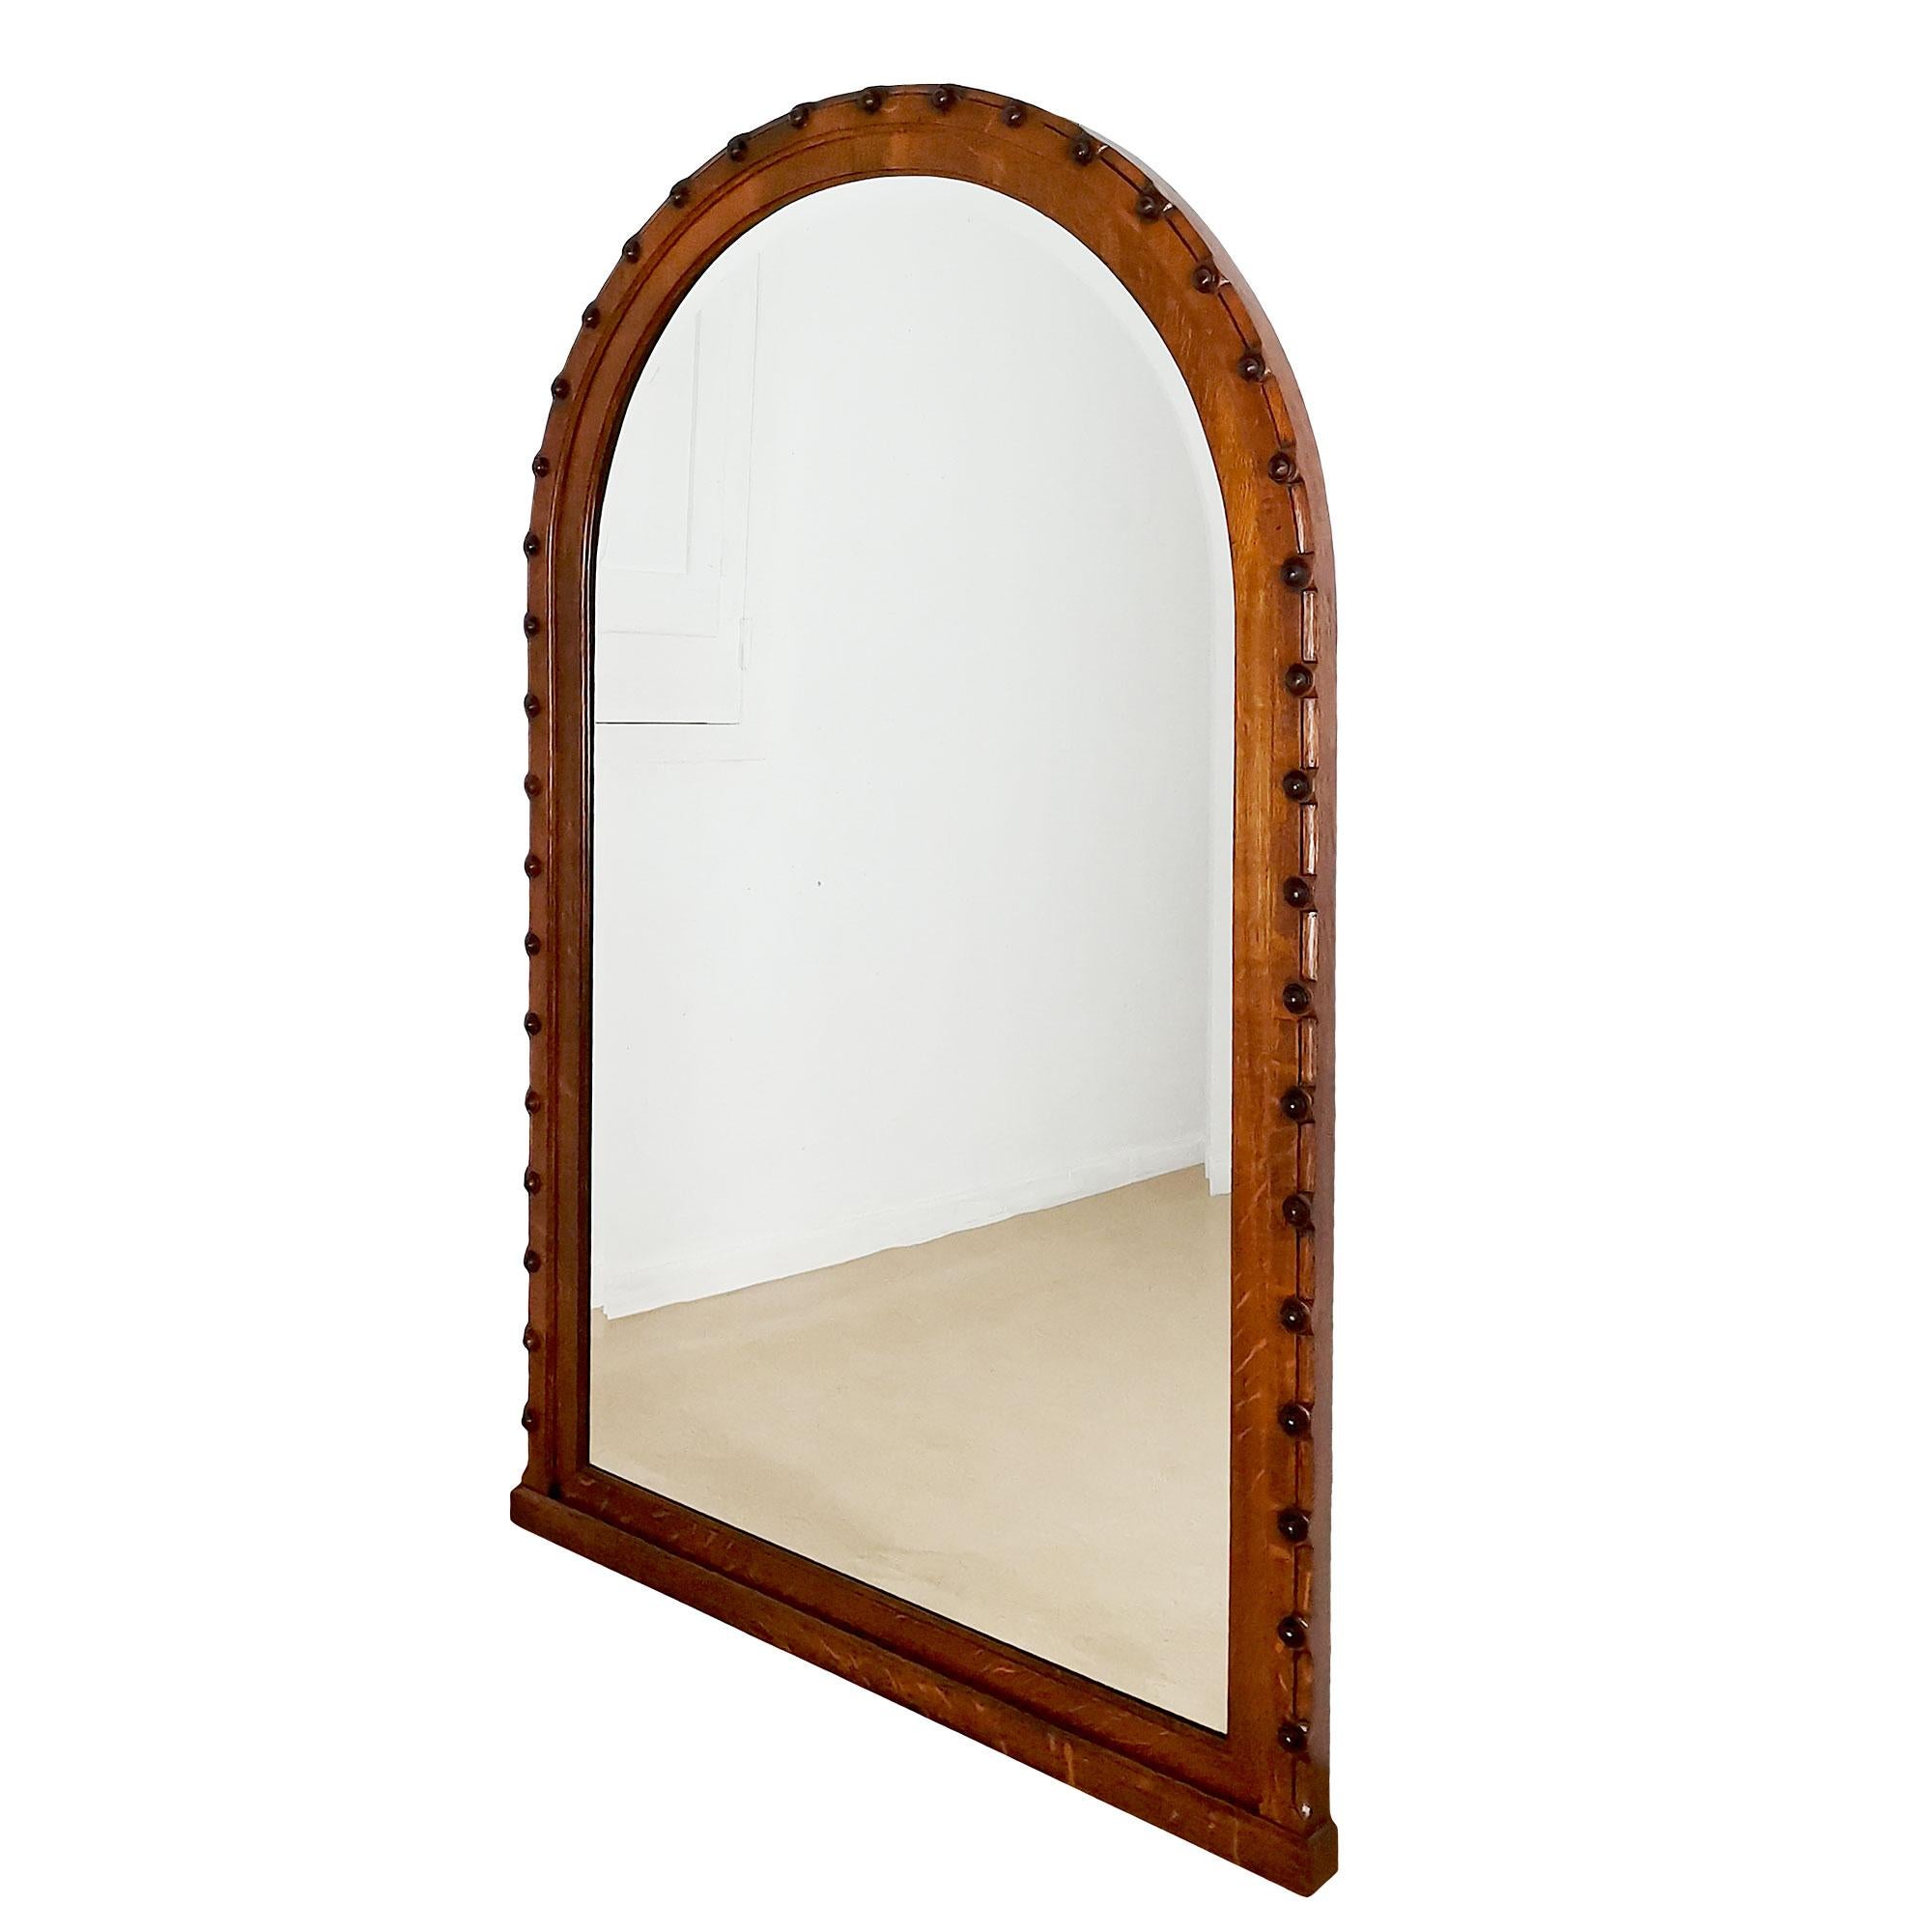 Large oak mirror, oak veneer with round decoration, very thick original bevelled glass. Satin shellac finish.

Spain, Barcelona c.1940.